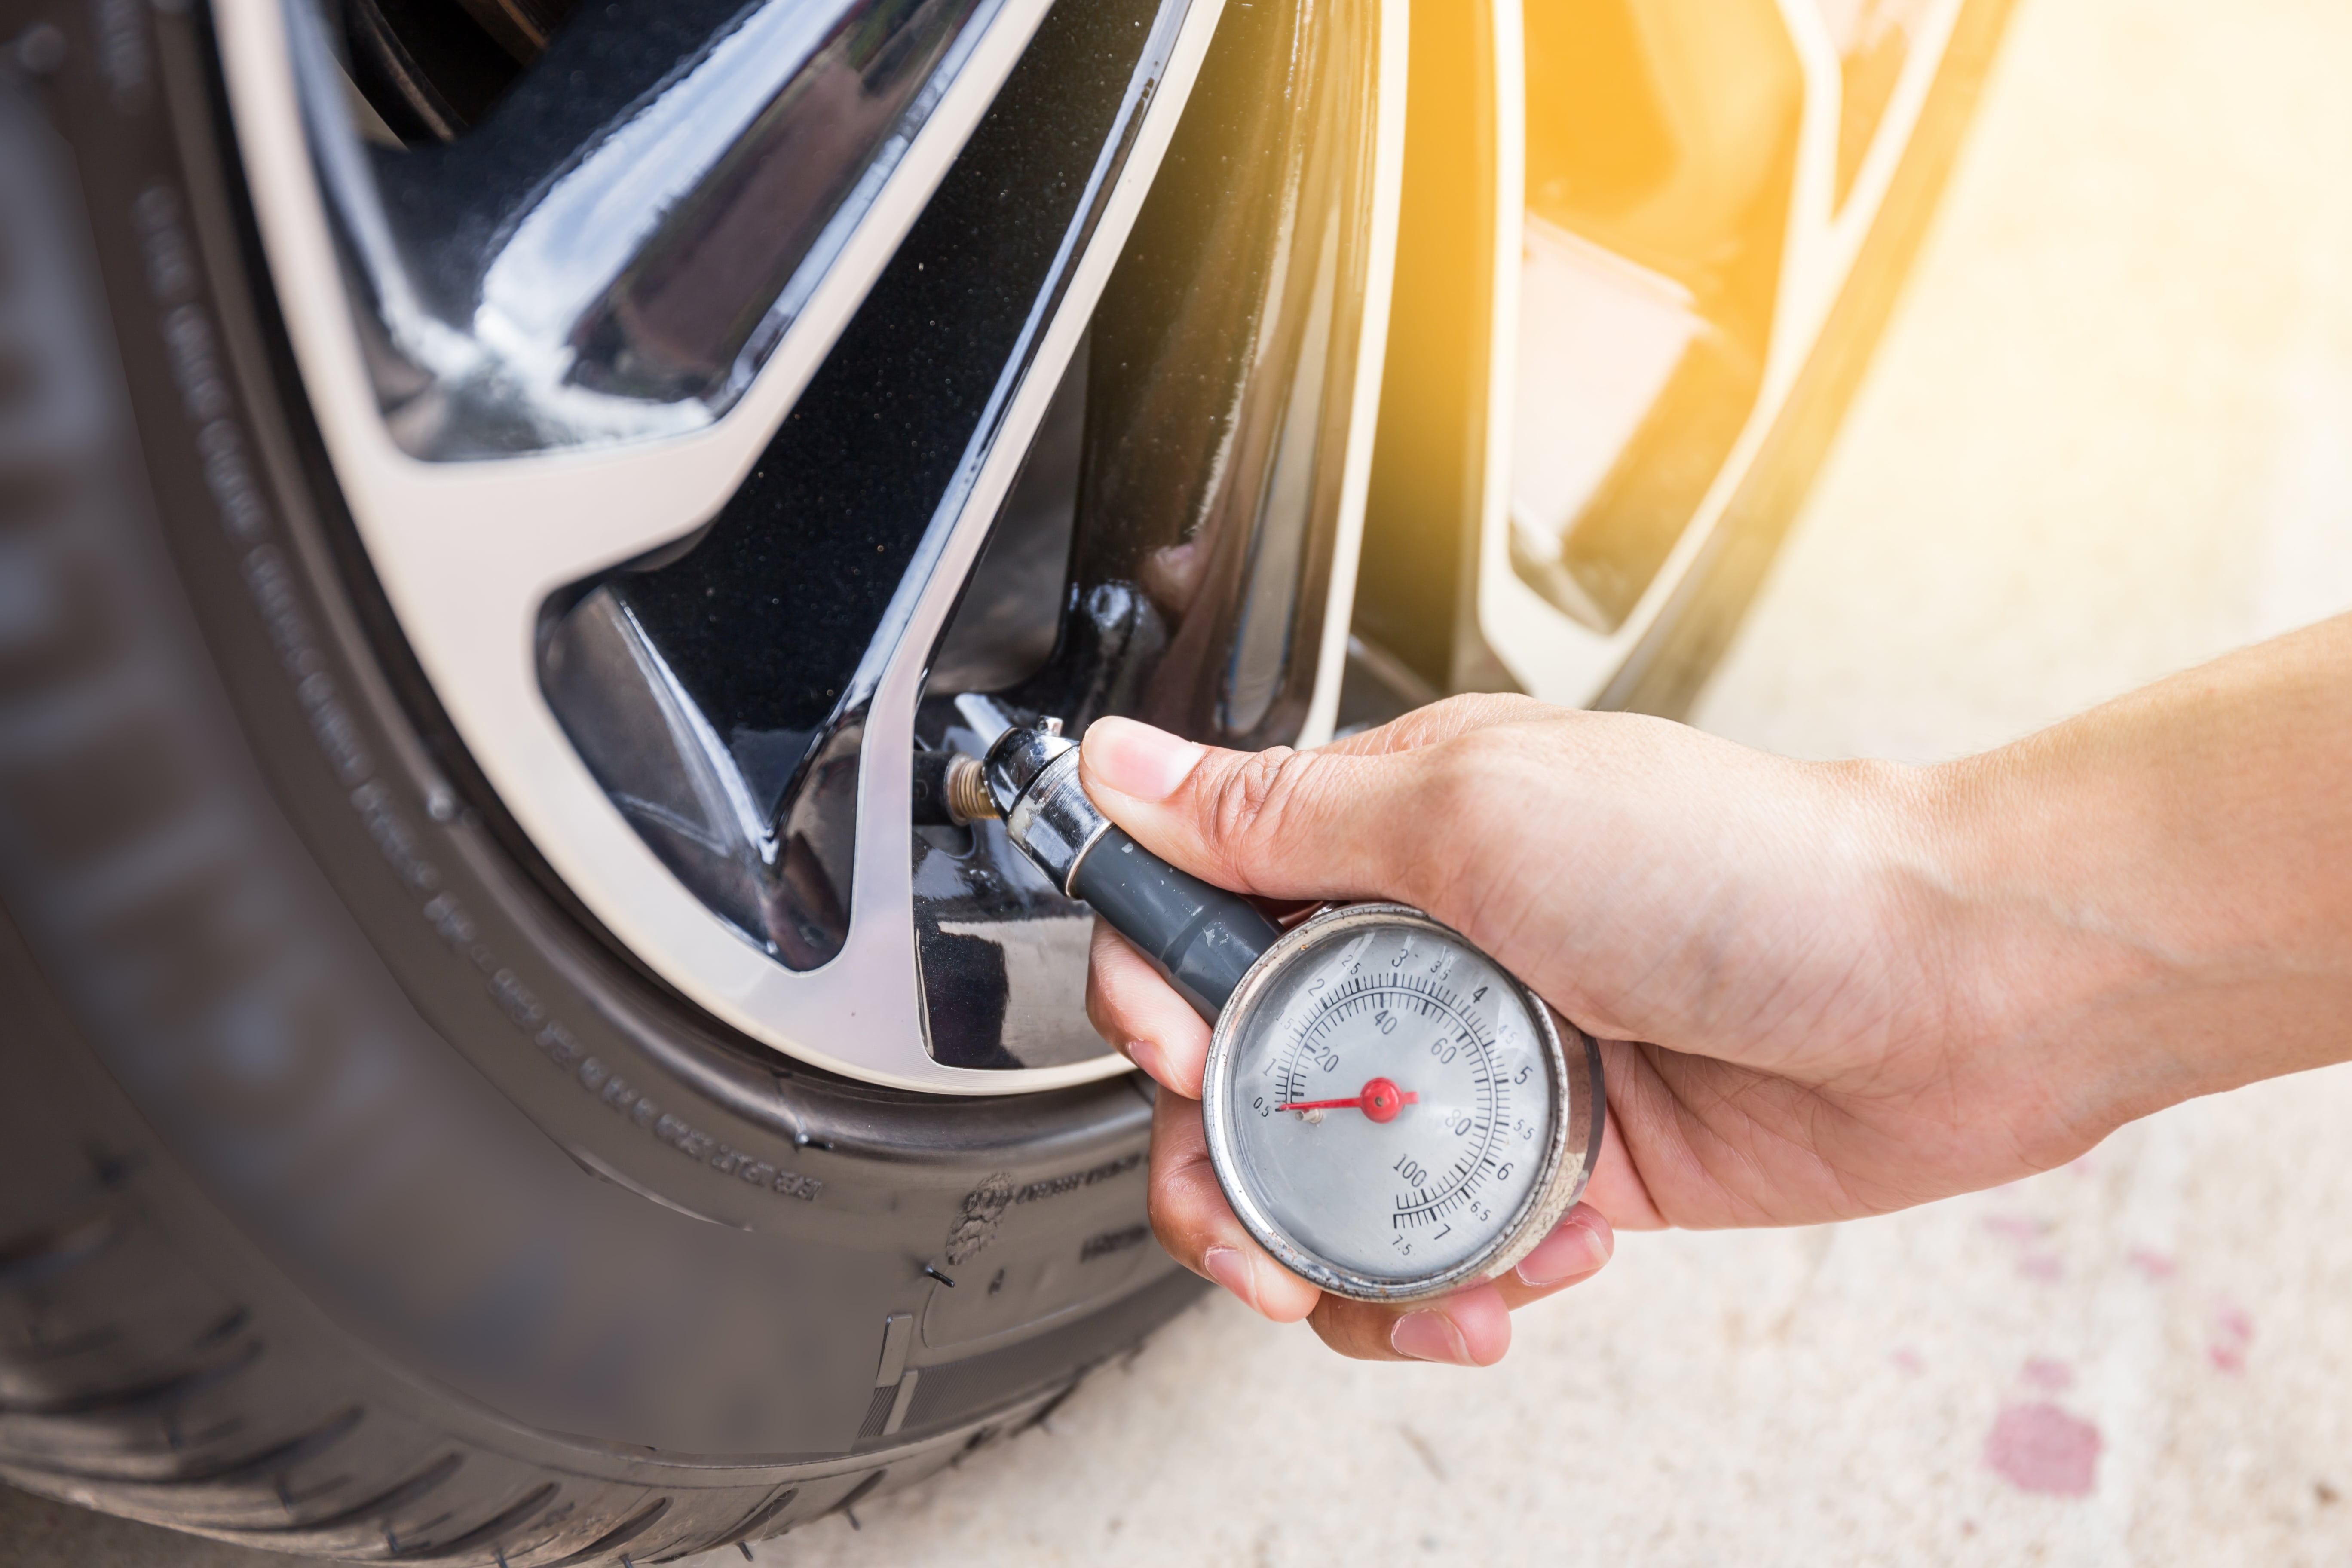 Here are some tips to keep your tires in good condition.